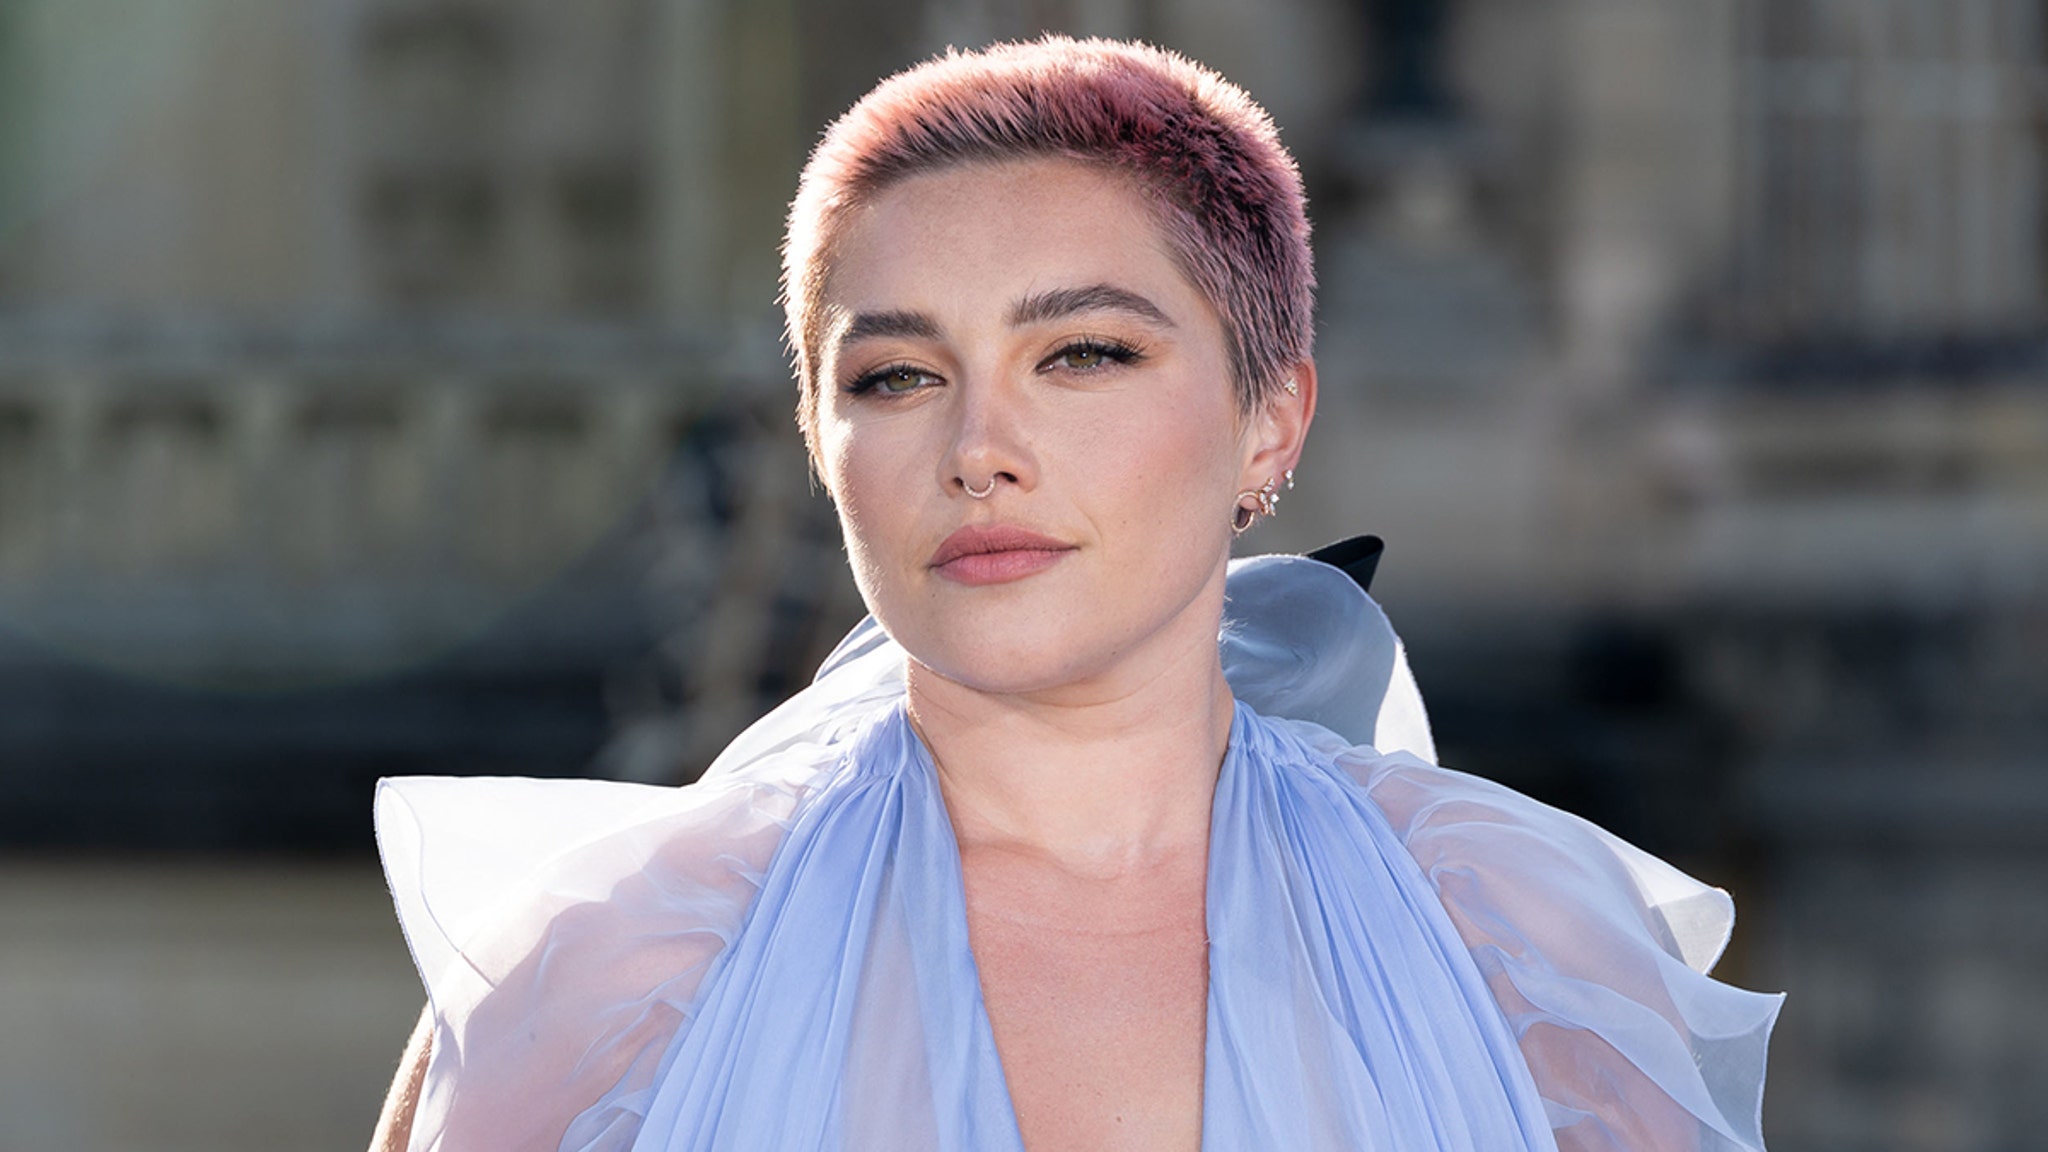 Florence Pugh's See-Through Dress Announces 'Extended Nudity' in 'Oppenheimer'